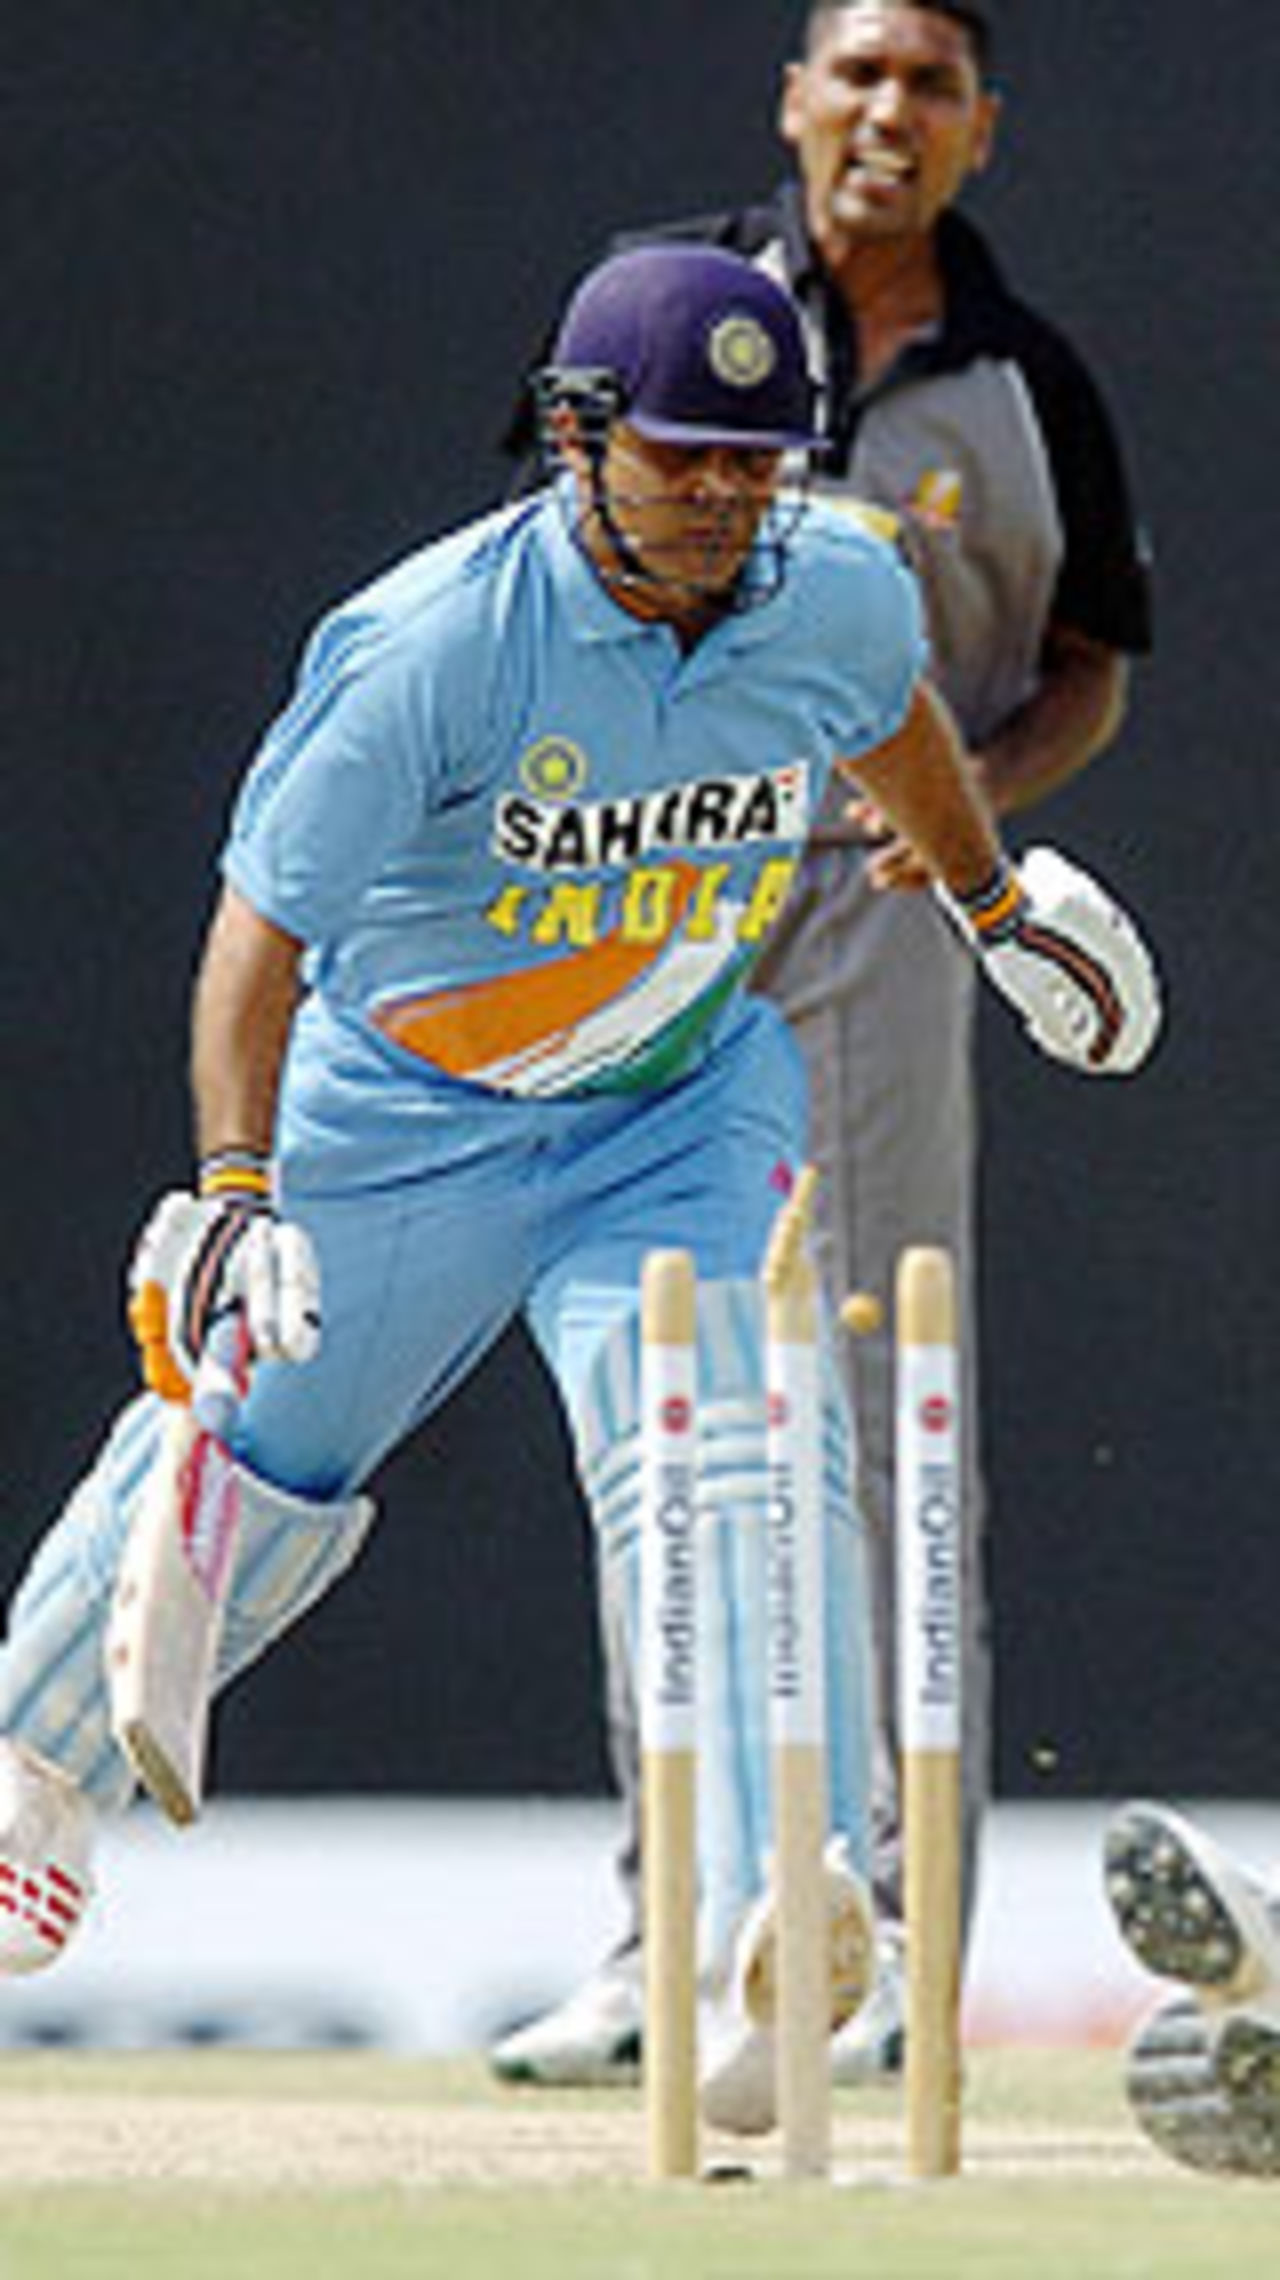 Virender Sehwag is caught short of his crease, India v UAE, Asia Cup, Dambulla, July 16, 2004